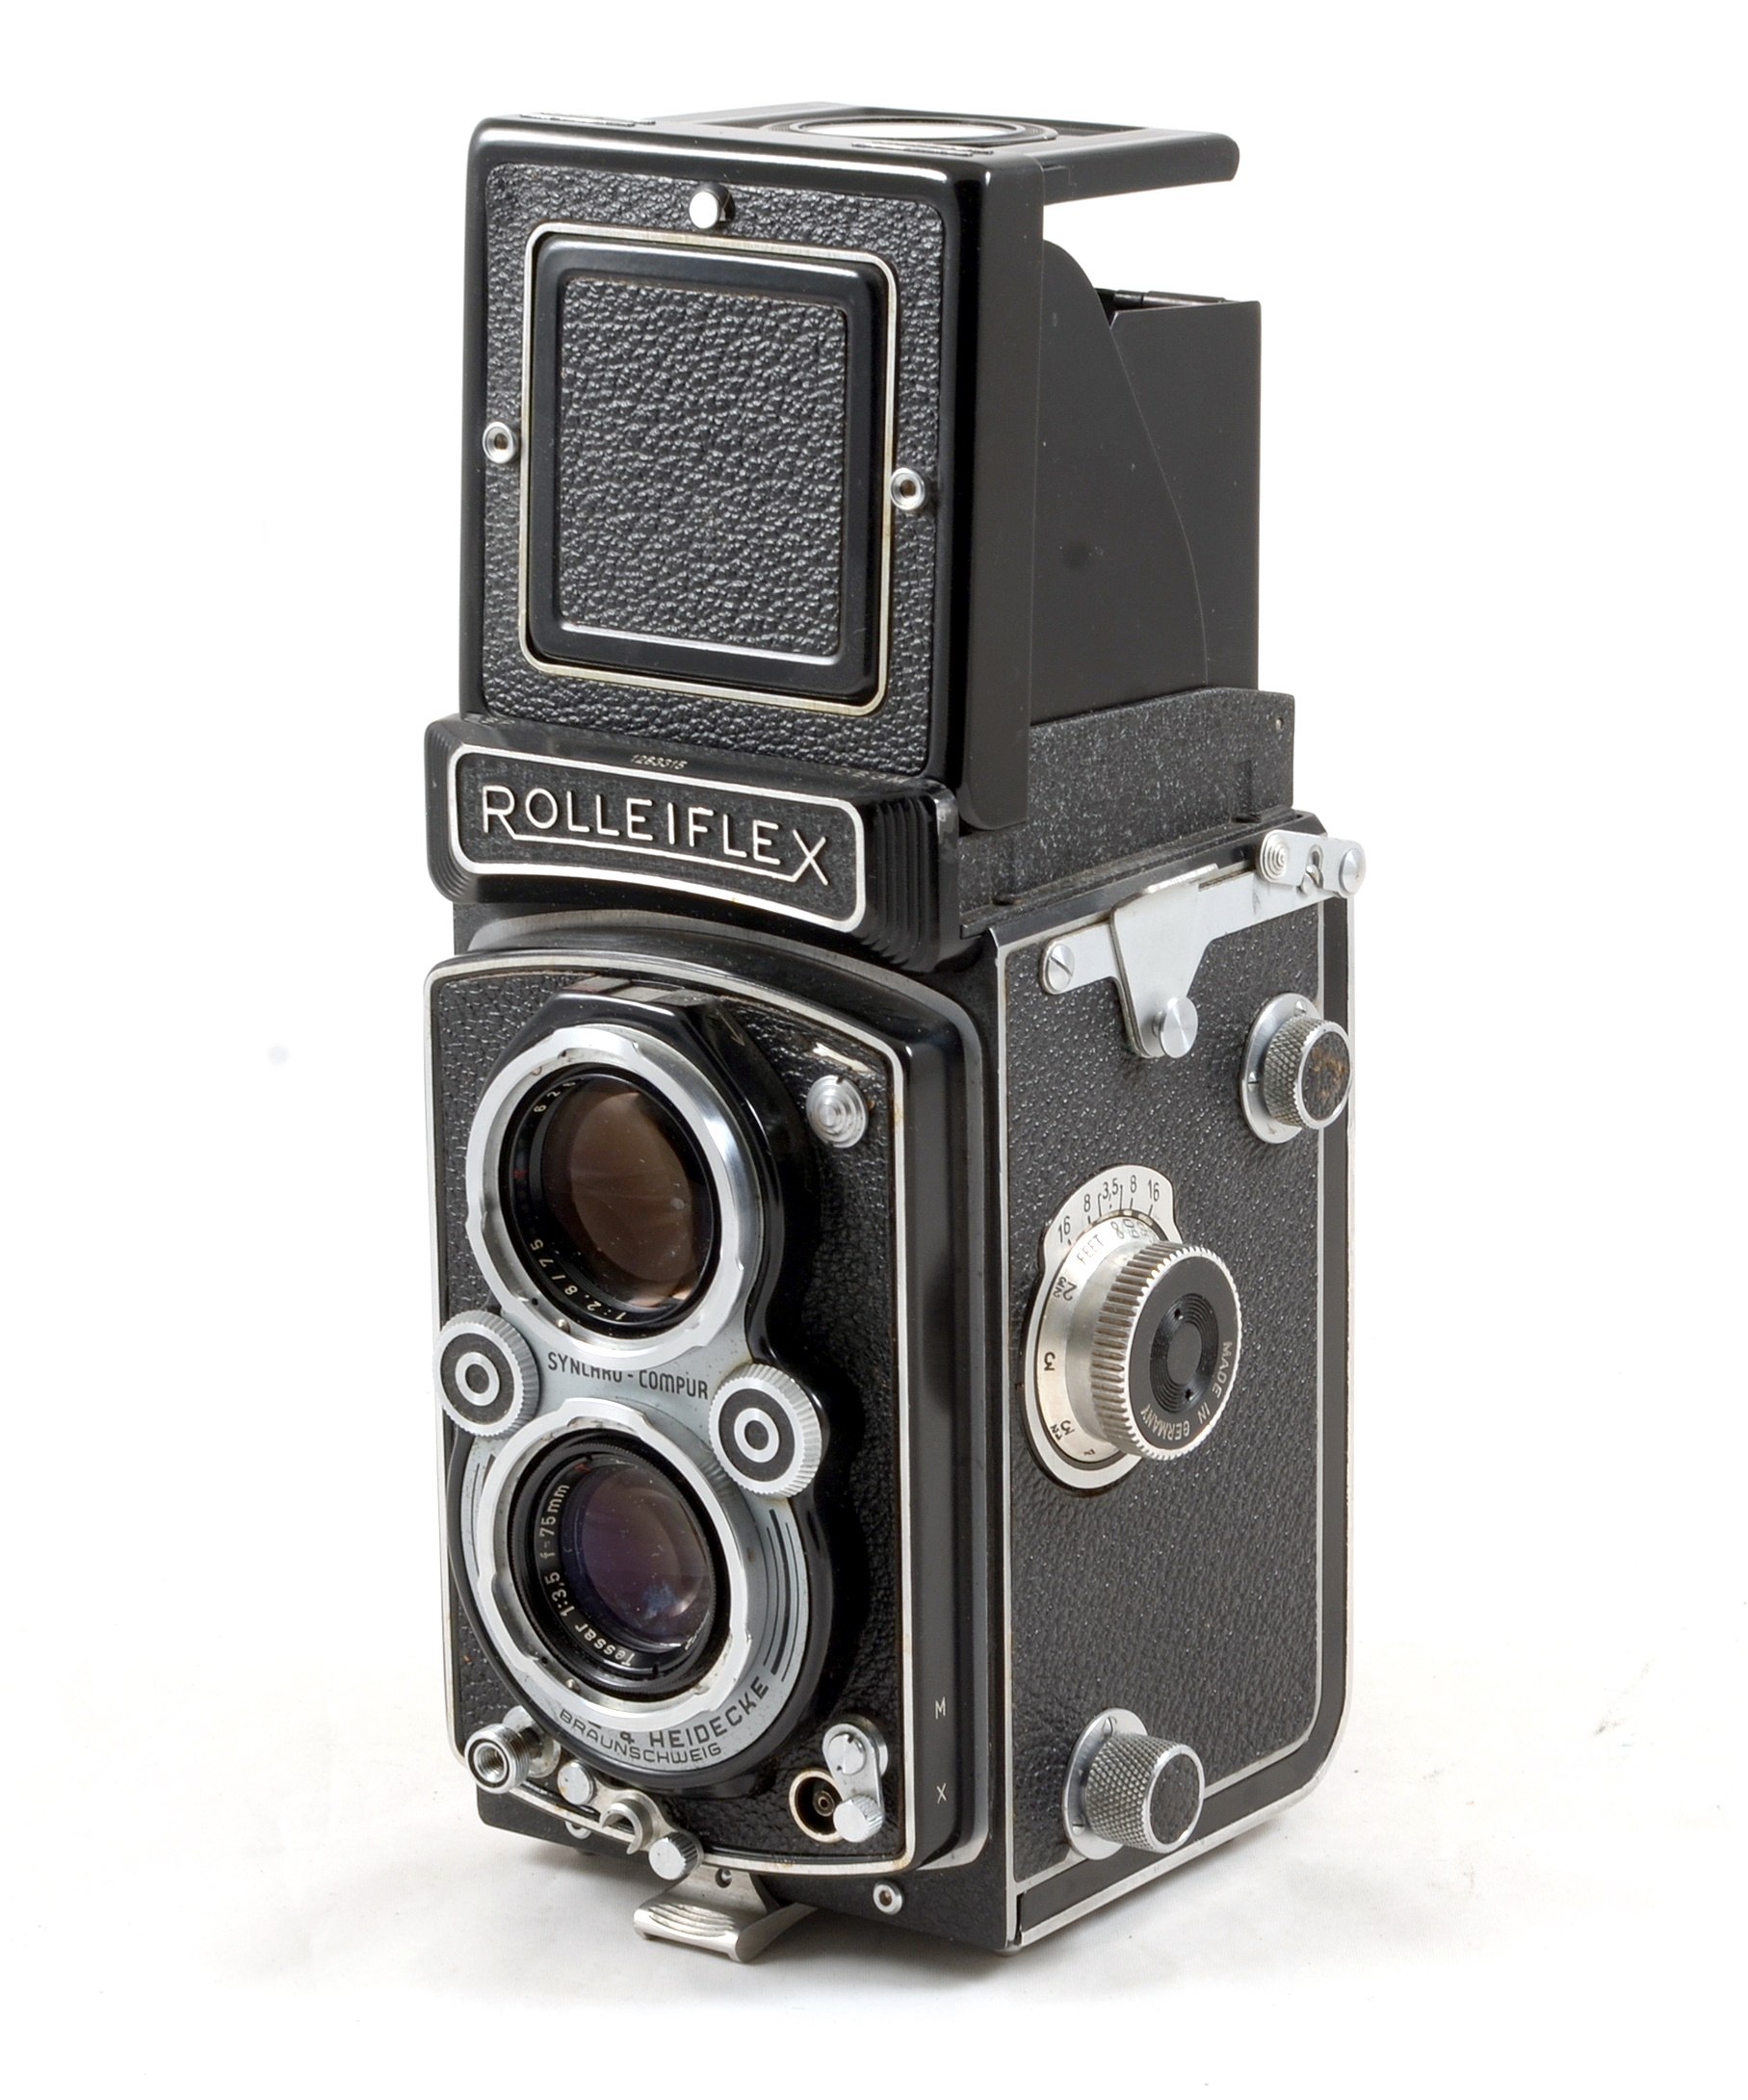 Rolleiflex f3.5 Automat MX TLR. - Image 2 of 3